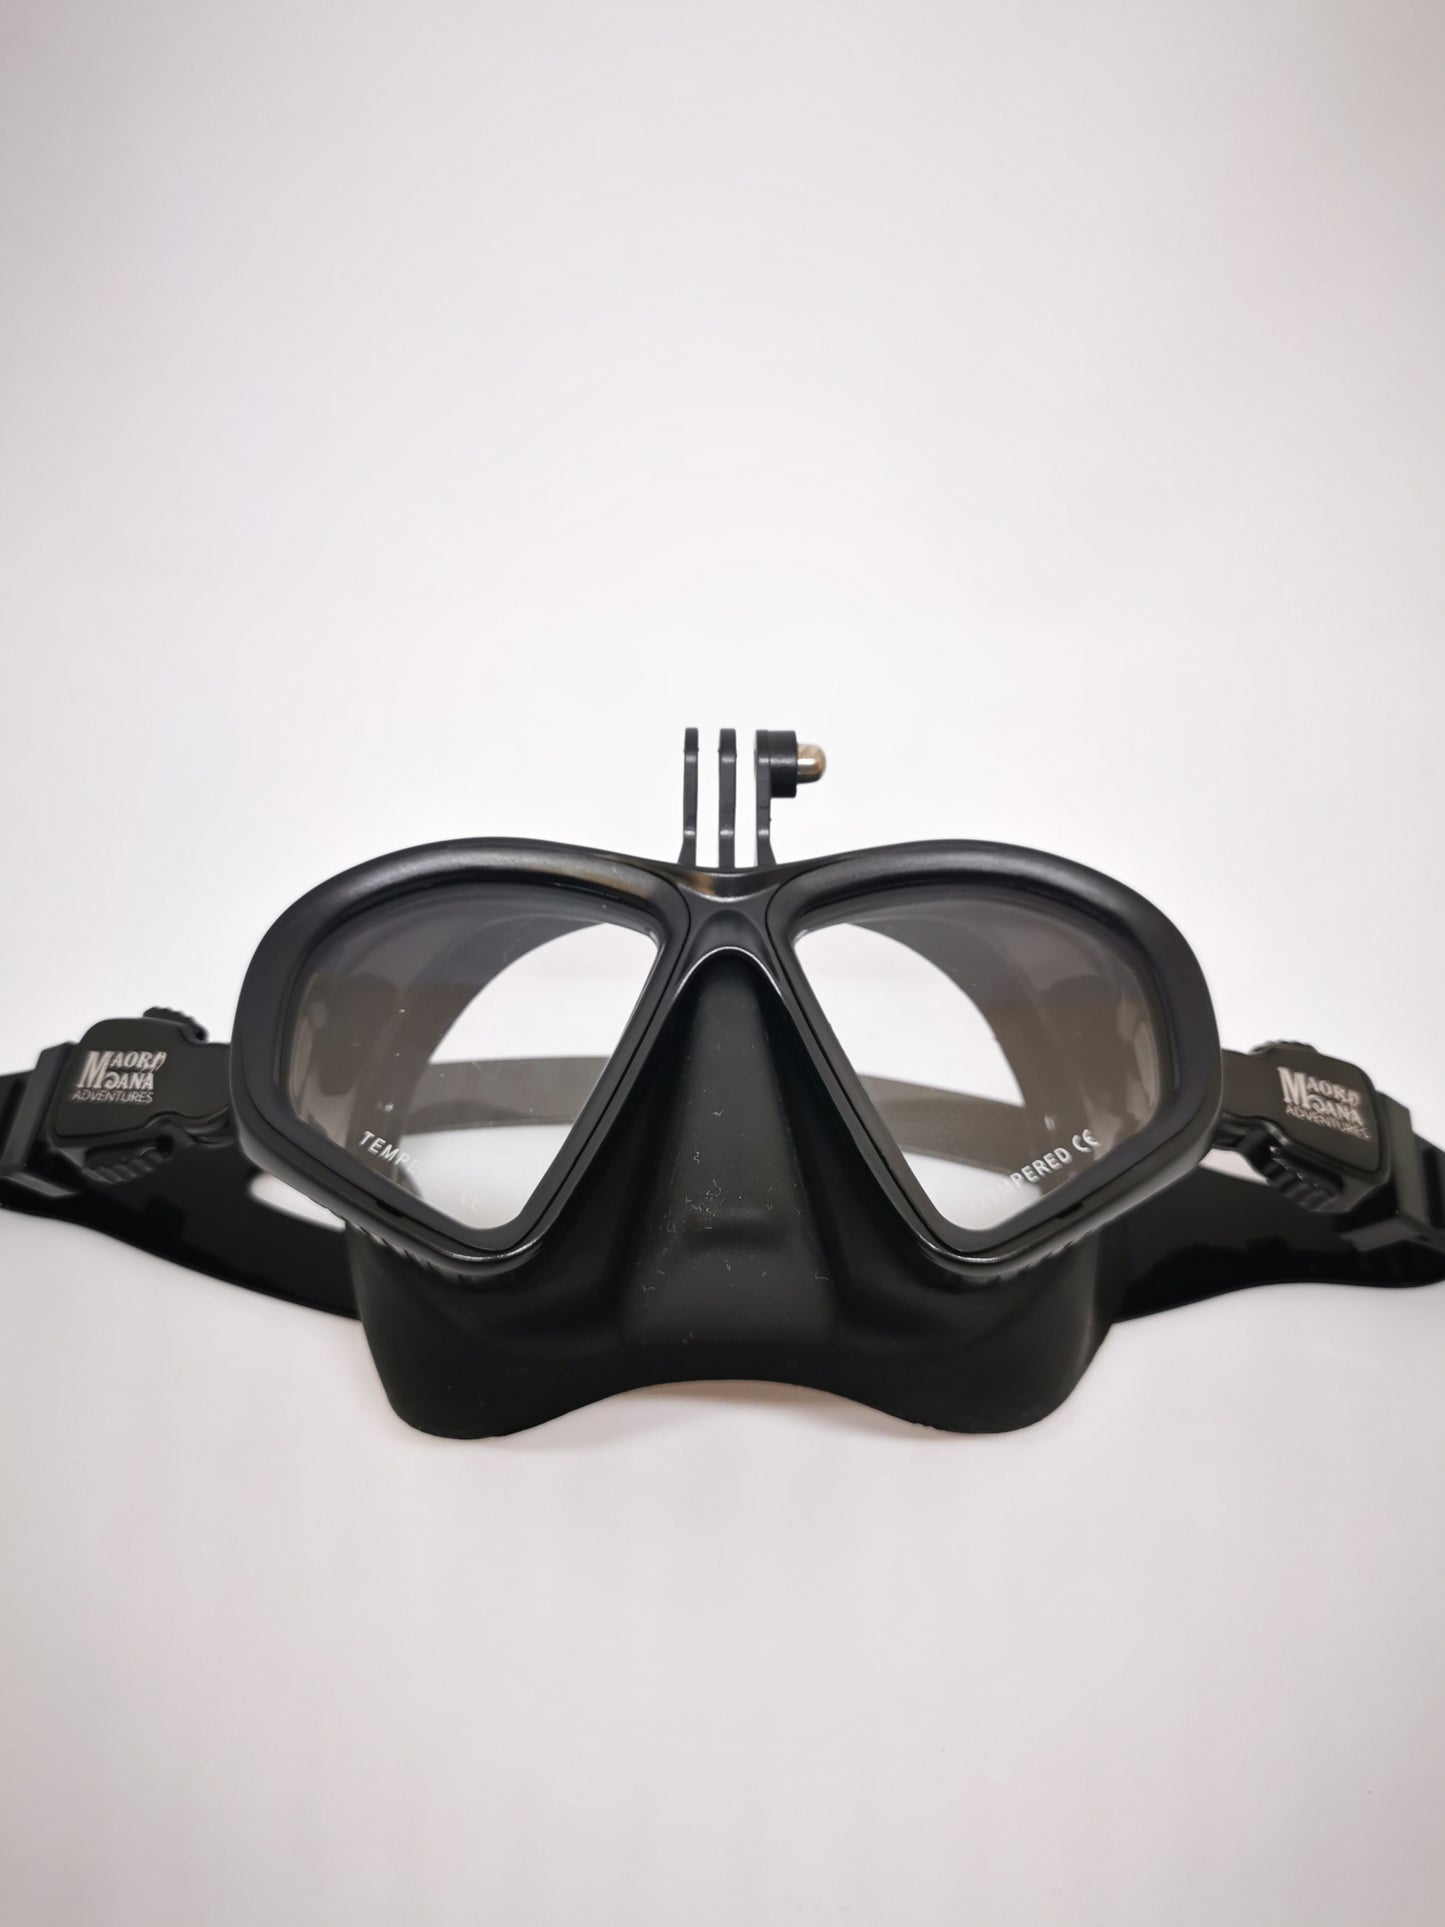 Action Camera Dive Mask and Snorkel Combo